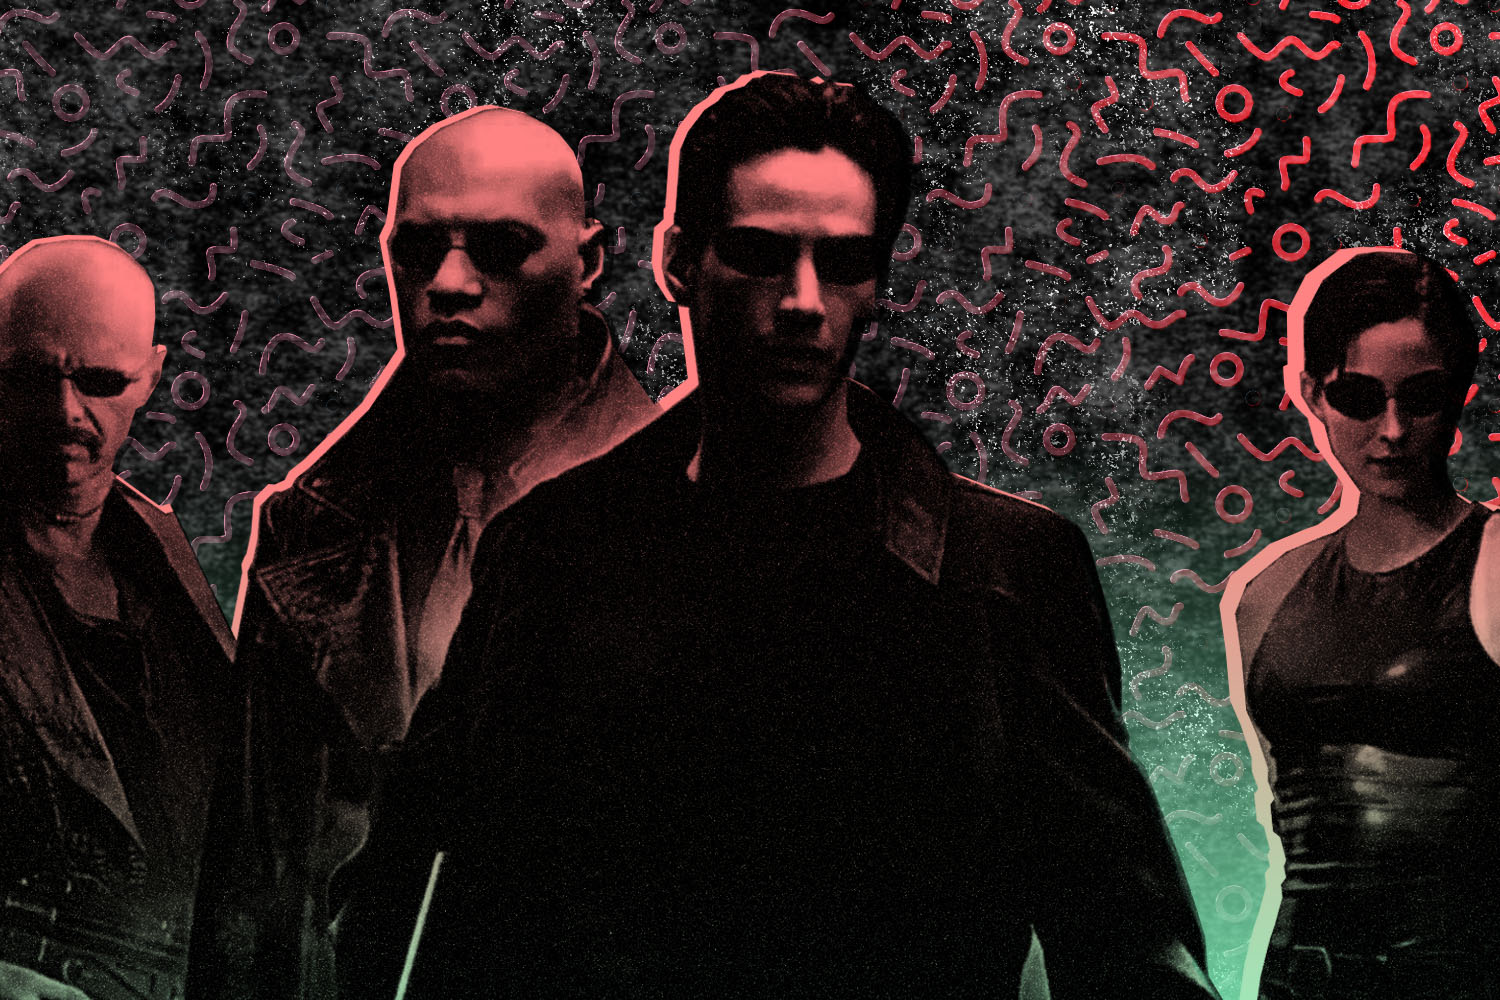 "The Matrix" is one of several 90s-era films making a return